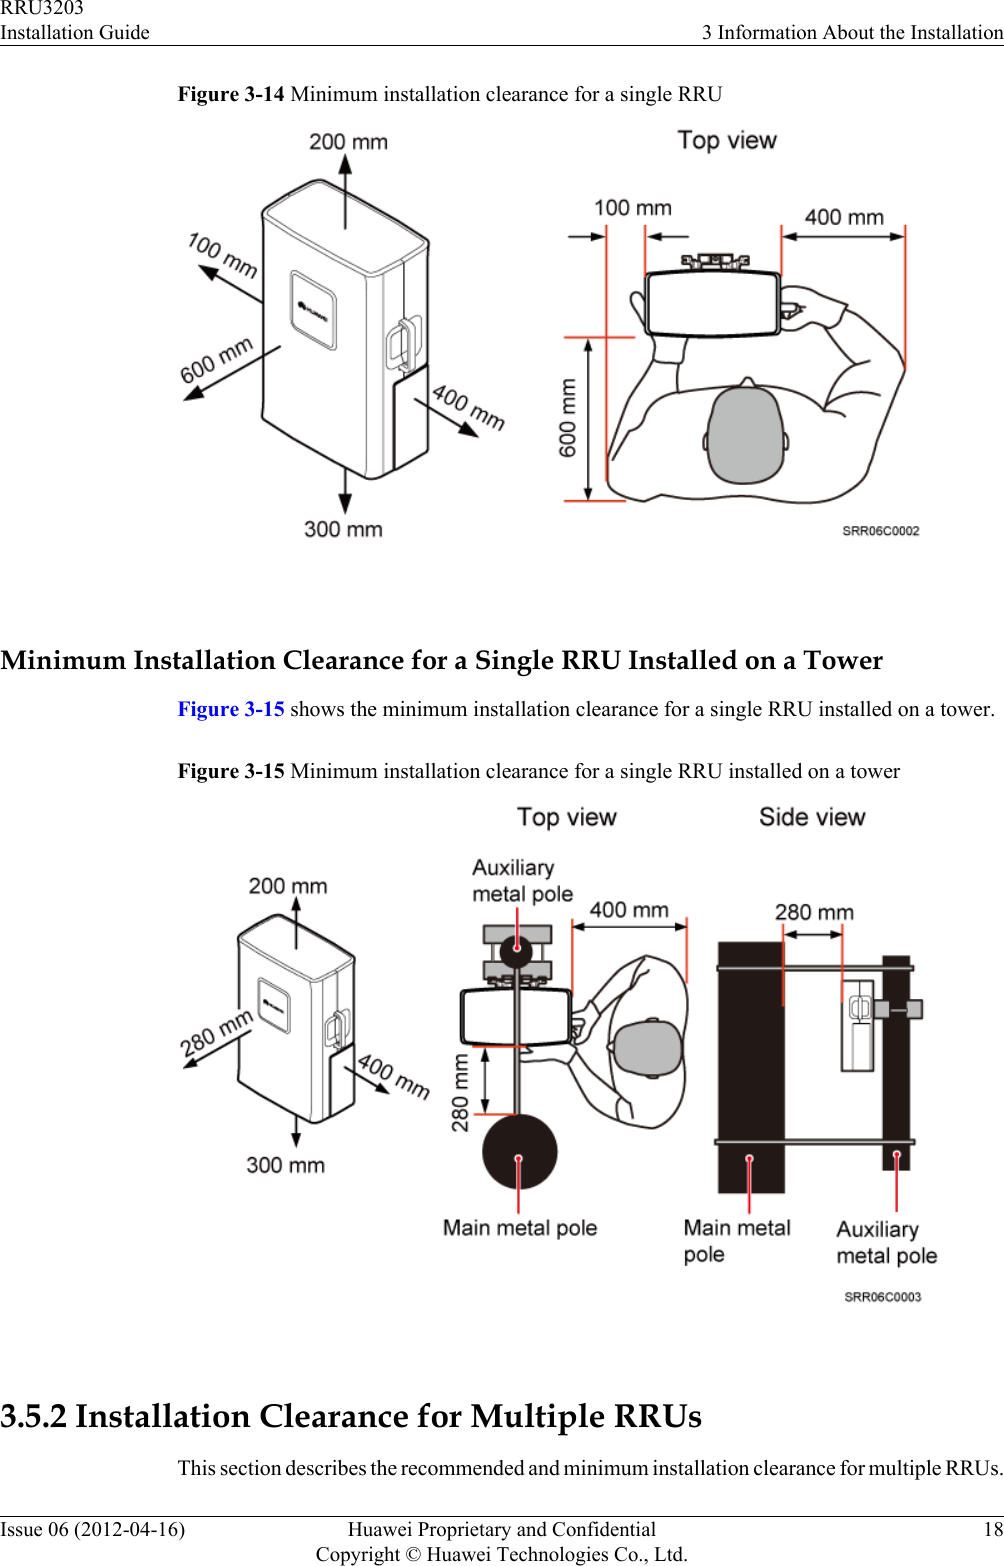 Figure 3-14 Minimum installation clearance for a single RRU Minimum Installation Clearance for a Single RRU Installed on a TowerFigure 3-15 shows the minimum installation clearance for a single RRU installed on a tower.Figure 3-15 Minimum installation clearance for a single RRU installed on a tower 3.5.2 Installation Clearance for Multiple RRUsThis section describes the recommended and minimum installation clearance for multiple RRUs.RRU3203Installation Guide 3 Information About the InstallationIssue 06 (2012-04-16) Huawei Proprietary and ConfidentialCopyright © Huawei Technologies Co., Ltd.18